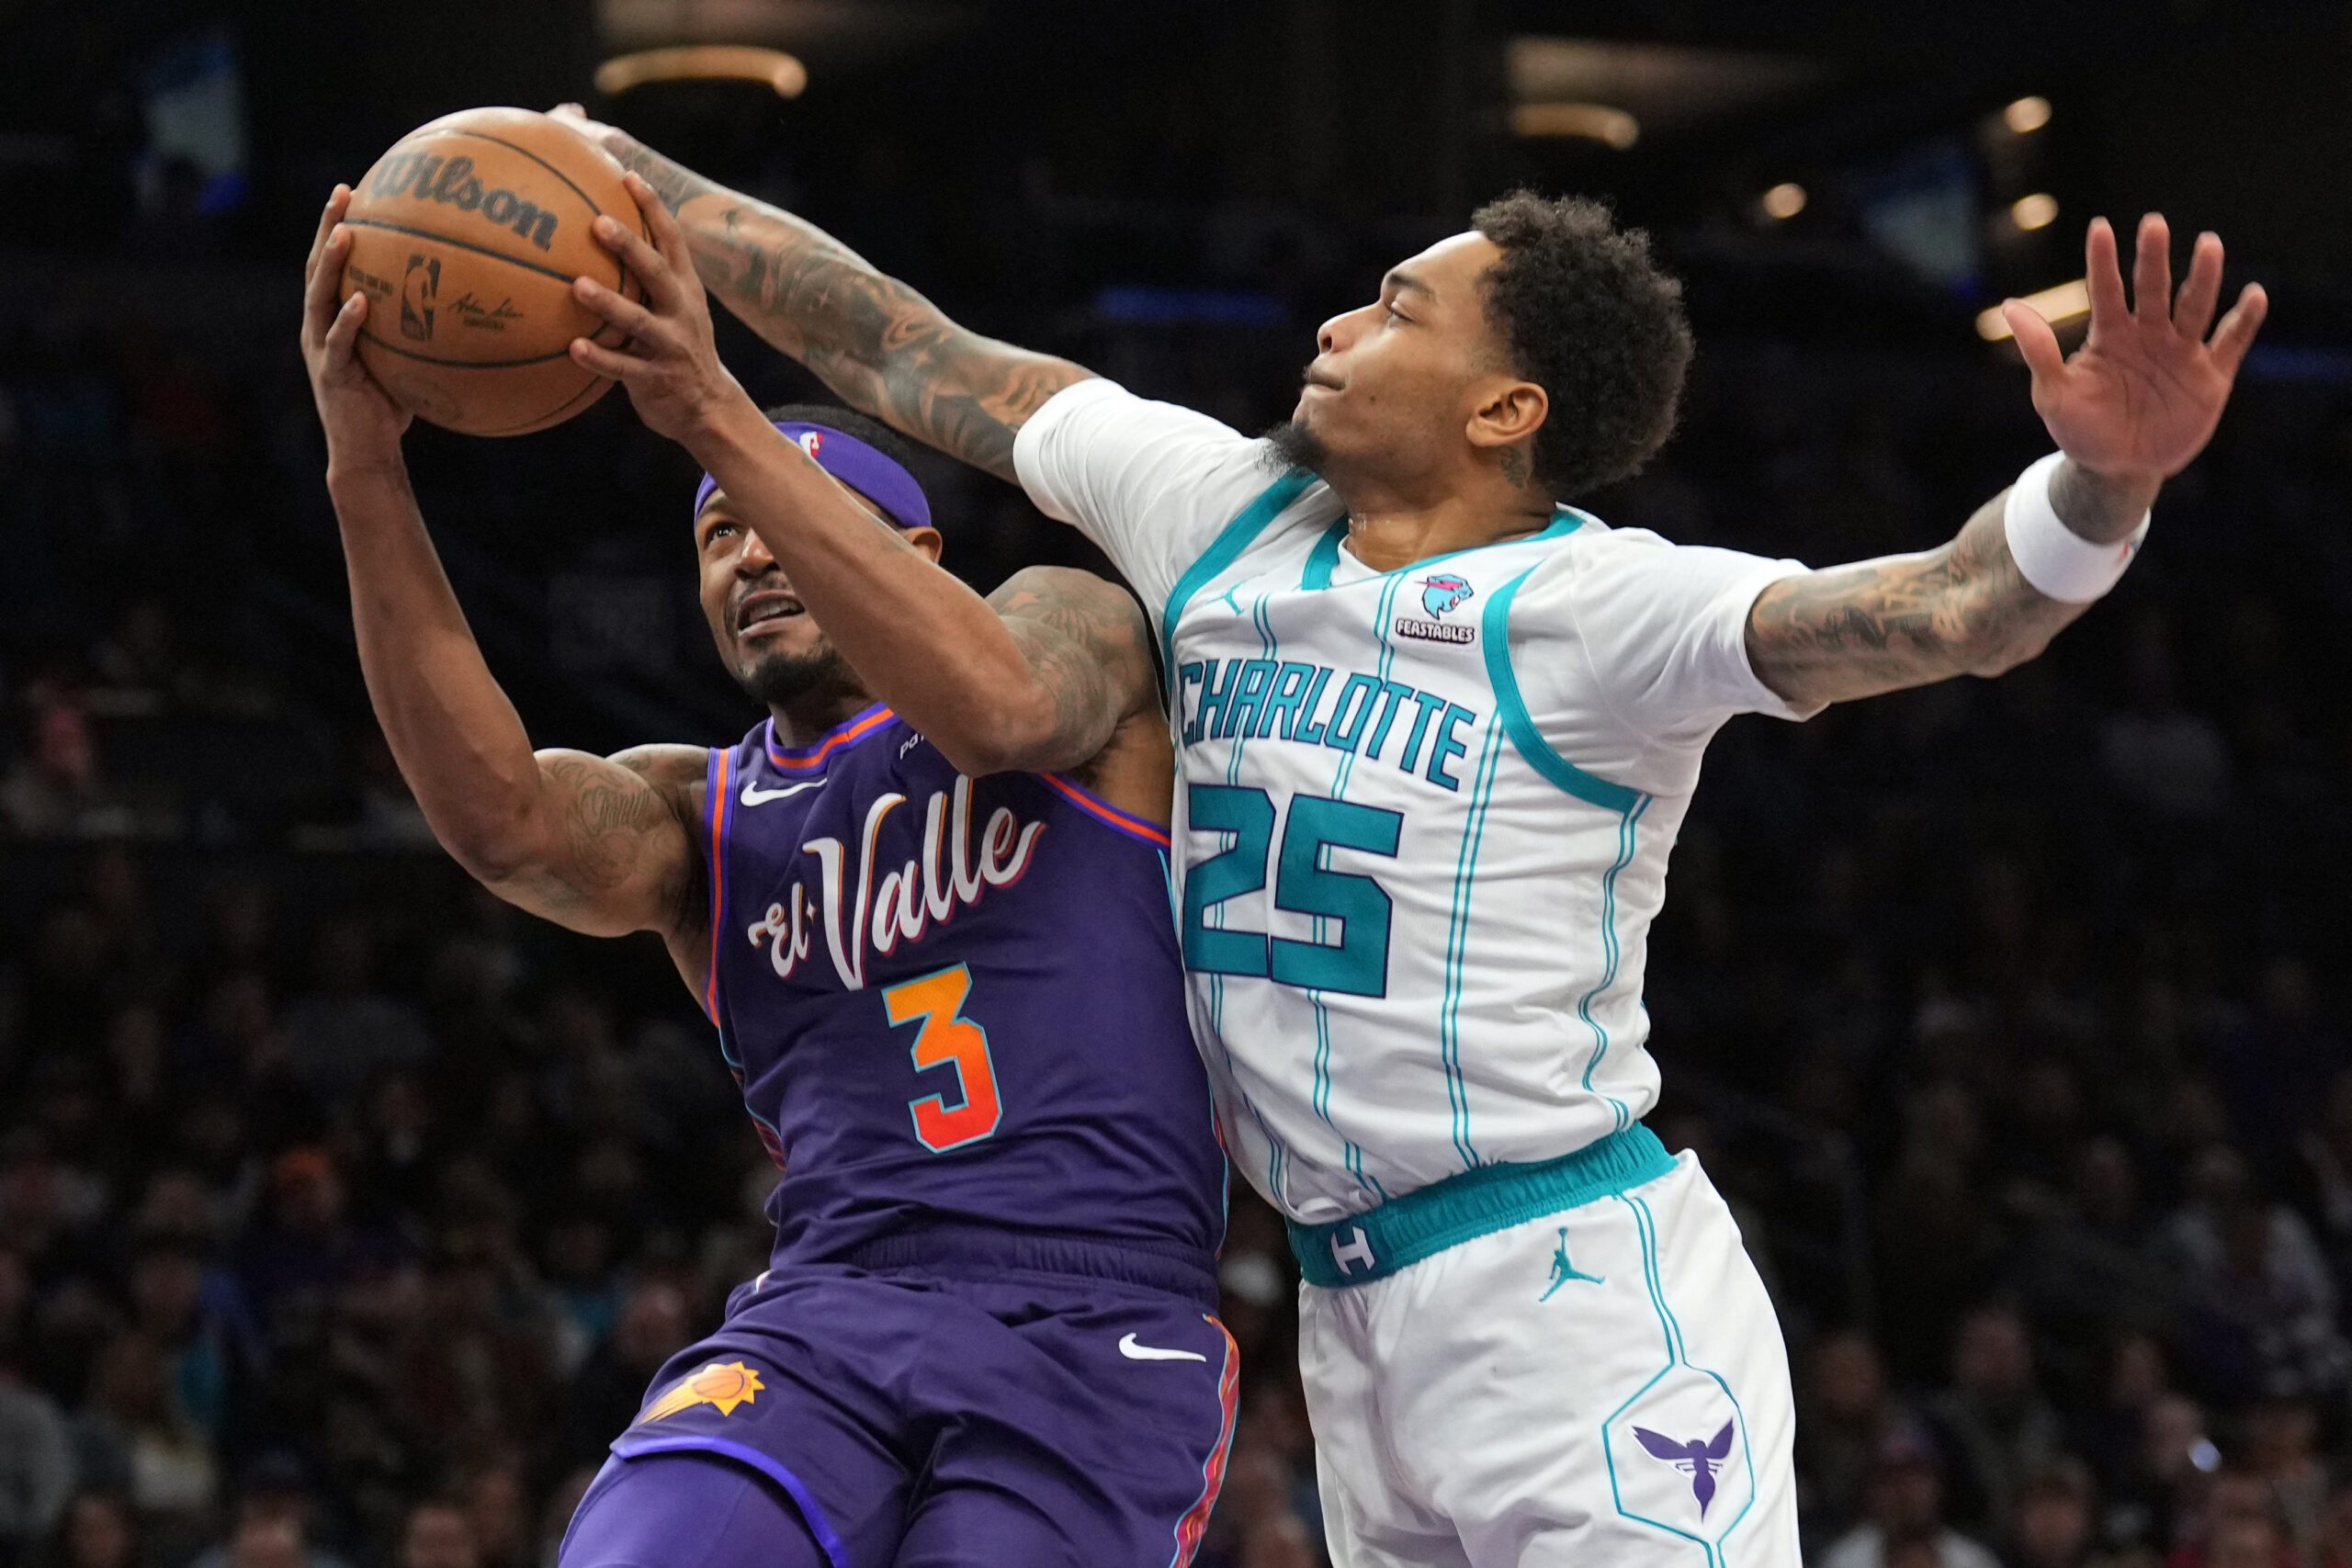 New Suns 'Big 3' nail first win together, rout lowly Hornets